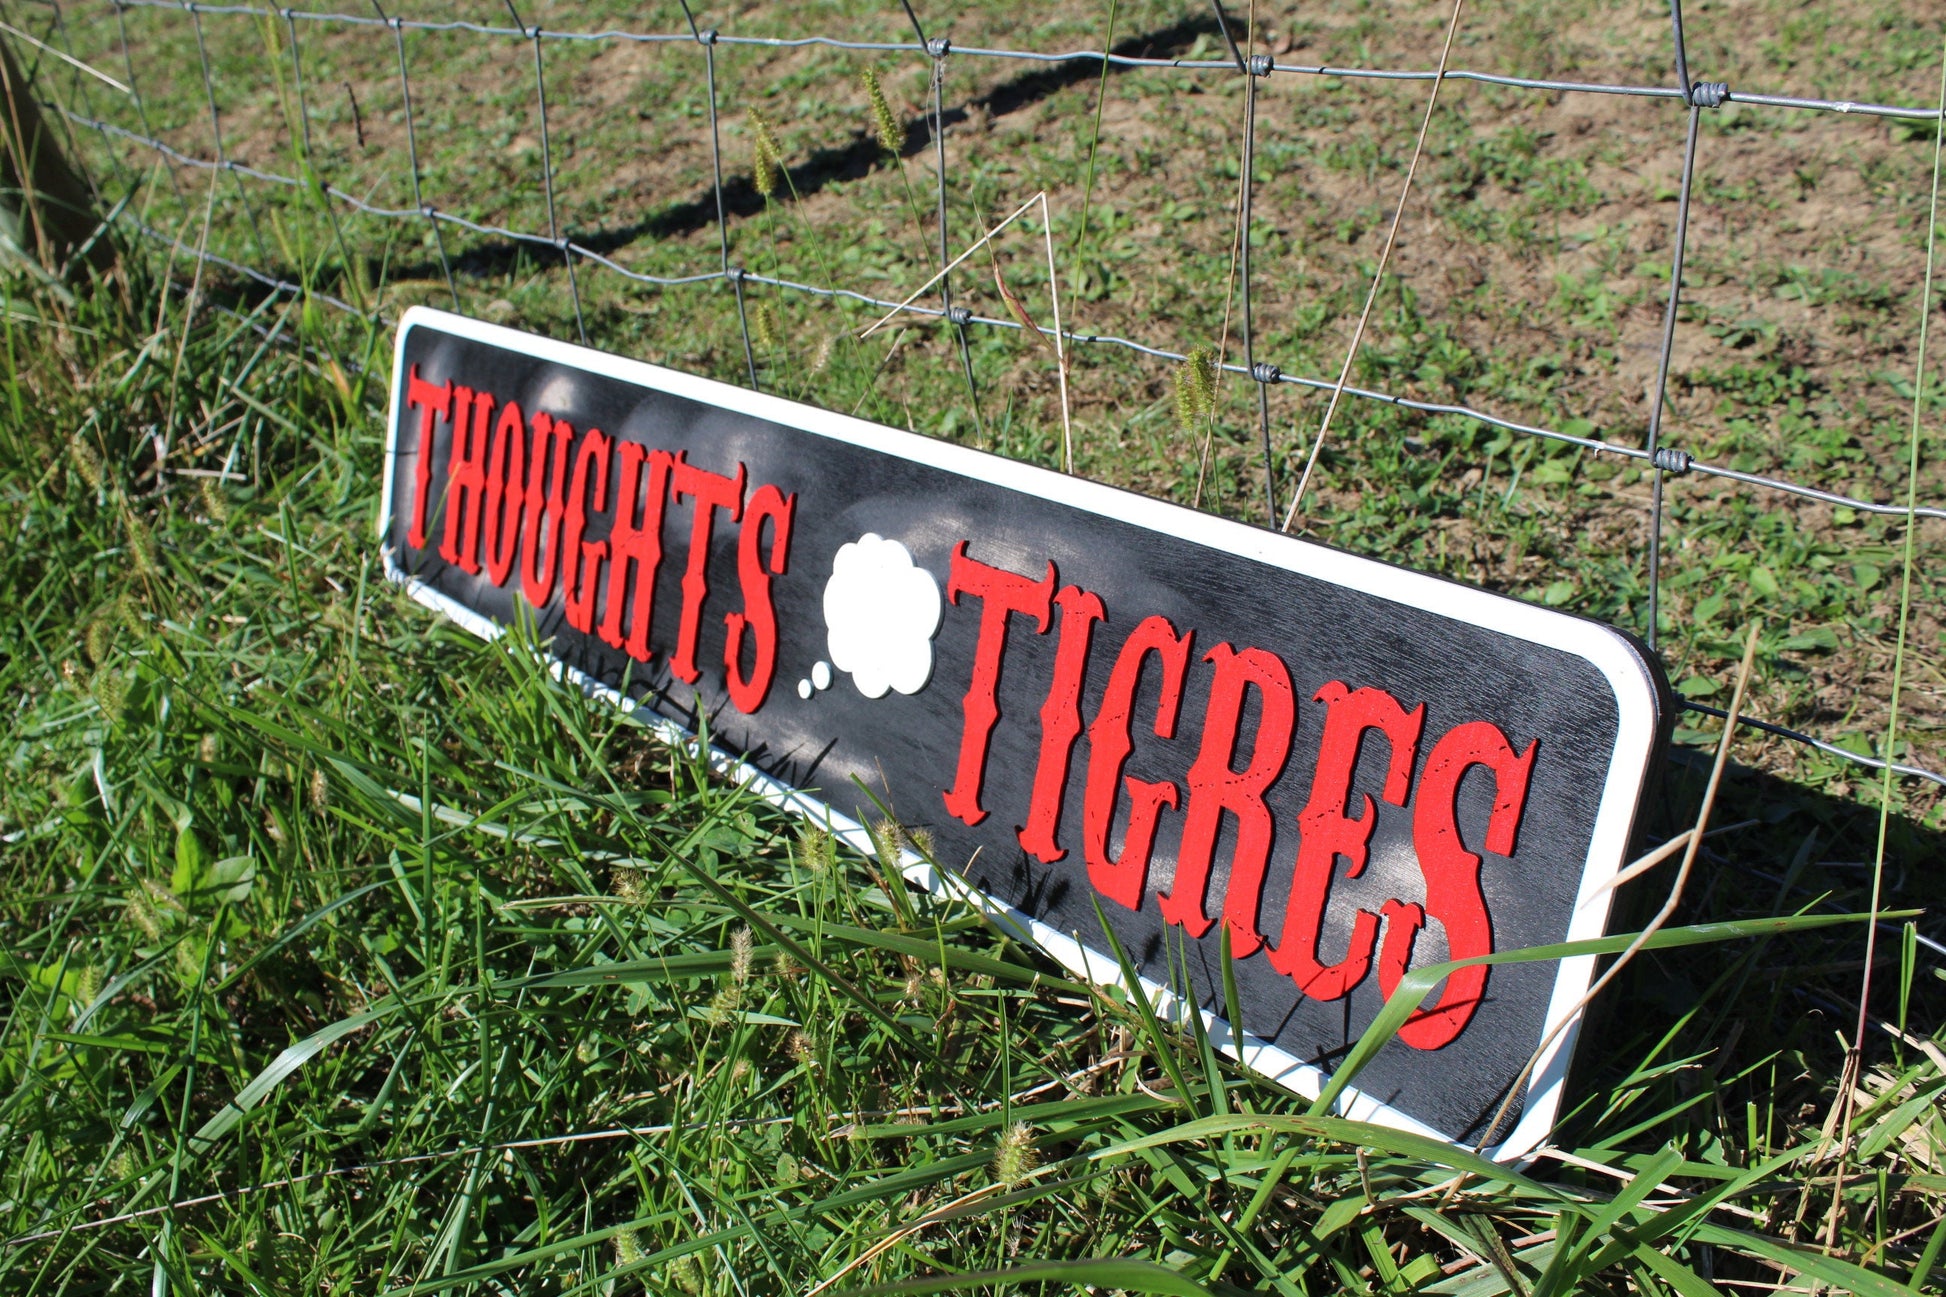 Custom Distressed Sign Thoughts Tigres ThoughtBubble Cigar Lounge Oversized Rustic Business Logo Bar Barn Wood 3D BBQ Patio Garage ManCave